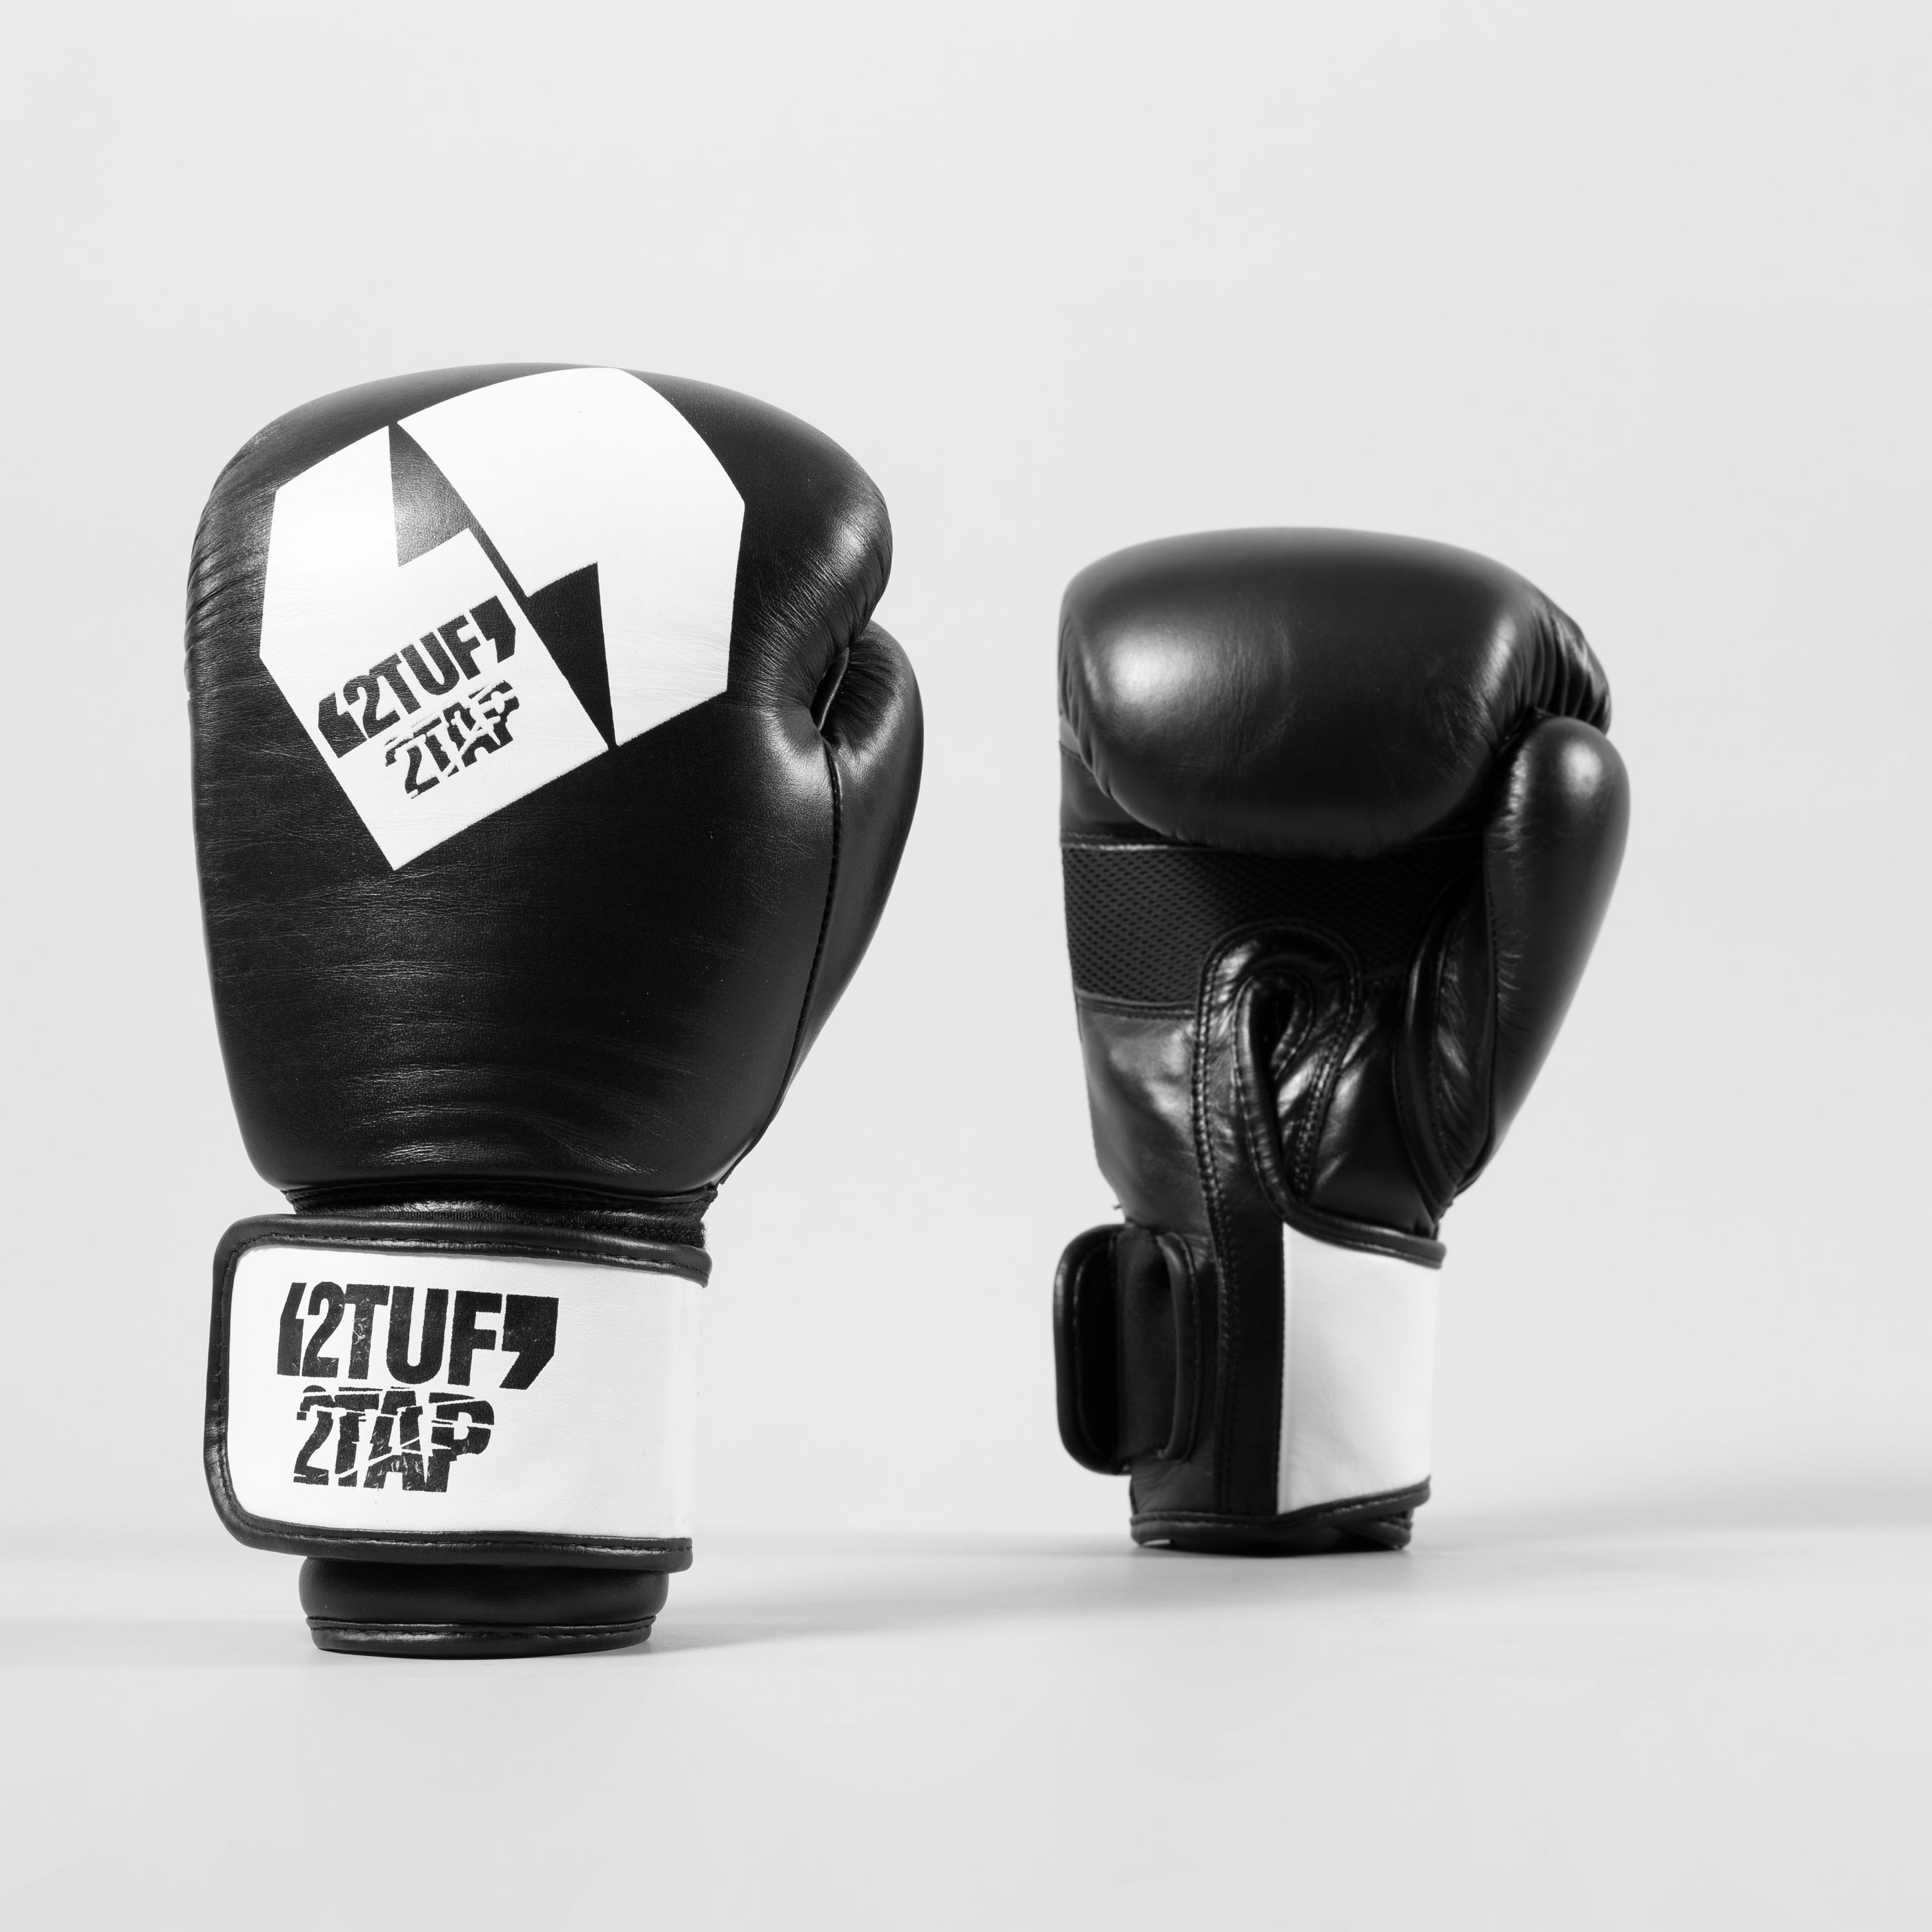 'Title' Professional Boxing Gloves - Cowhide Leather - Black/White 2TUF2TAP